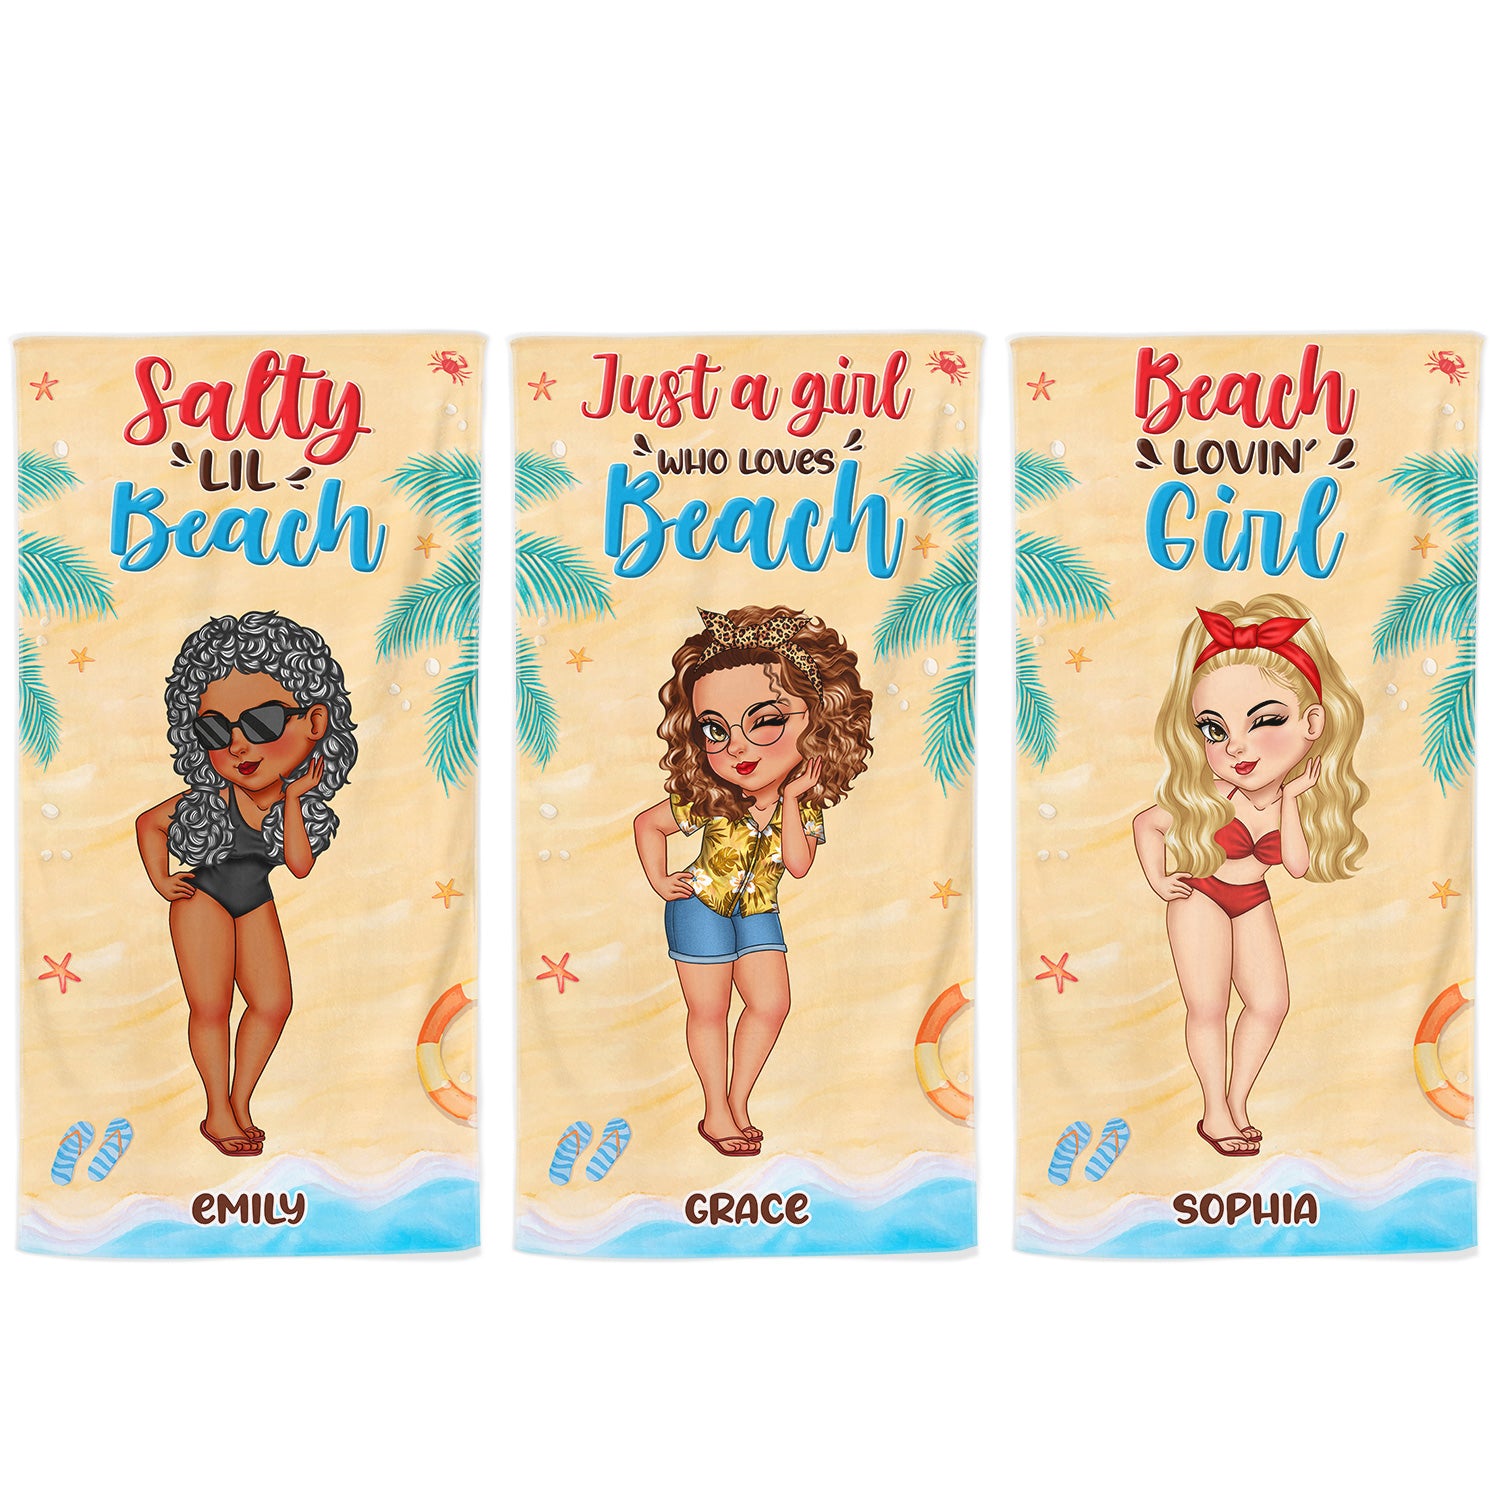 Beach Lovin' Girl Traveling Poolside Swimming Picnic - Birthday, Vacation Gift For Her, Besties - Personalized Beach Towel